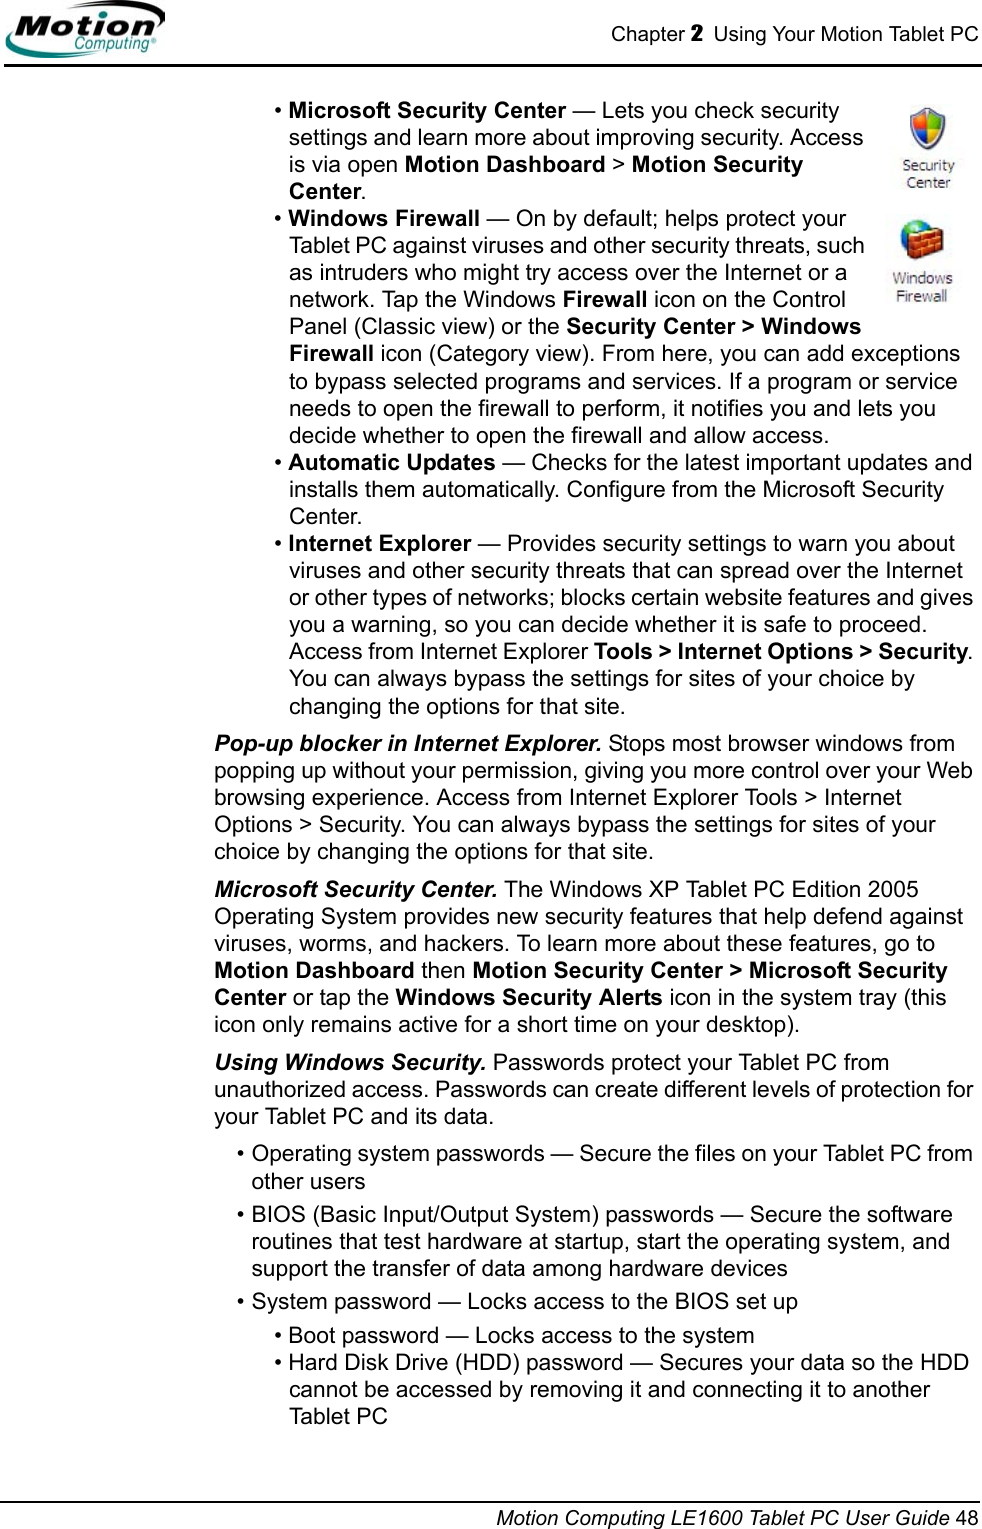 Chapter 2  Using Your Motion Tablet PCMotion Computing LE1600 Tablet PC User Guide 48• Microsoft Security Center — Lets you check security settings and learn more about improving security. Access is via open Motion Dashboard &gt; Motion Security Center.• Windows Firewall — On by default; helps protect your Tablet PC against viruses and other security threats, such as intruders who might try access over the Internet or a network. Tap the Windows Firewall icon on the Control Panel (Classic view) or the Security Center &gt; Windows Firewall icon (Category view). From here, you can add exceptions to bypass selected programs and services. If a program or service needs to open the firewall to perform, it notifies you and lets you decide whether to open the firewall and allow access.• Automatic Updates — Checks for the latest important updates and installs them automatically. Configure from the Microsoft Security Center.• Internet Explorer — Provides security settings to warn you about viruses and other security threats that can spread over the Internet or other types of networks; blocks certain website features and gives you a warning, so you can decide whether it is safe to proceed. Access from Internet Explorer Tools &gt; Internet Options &gt; Security. You can always bypass the settings for sites of your choice by changing the options for that site.Pop-up blocker in Internet Explorer. Stops most browser windows from popping up without your permission, giving you more control over your Web browsing experience. Access from Internet Explorer Tools &gt; Internet Options &gt; Security. You can always bypass the settings for sites of your choice by changing the options for that site.Microsoft Security Center. The Windows XP Tablet PC Edition 2005 Operating System provides new security features that help defend against viruses, worms, and hackers. To learn more about these features, go to Motion Dashboard then Motion Security Center &gt; Microsoft Security Center or tap the Windows Security Alerts icon in the system tray (this icon only remains active for a short time on your desktop).Using Windows Security. Passwords protect your Tablet PC from unauthorized access. Passwords can create different levels of protection for your Tablet PC and its data.• Operating system passwords — Secure the files on your Tablet PC from other users• BIOS (Basic Input/Output System) passwords — Secure the software routines that test hardware at startup, start the operating system, and support the transfer of data among hardware devices• System password — Locks access to the BIOS set up • Boot password — Locks access to the system• Hard Disk Drive (HDD) password — Secures your data so the HDD cannot be accessed by removing it and connecting it to another Tablet PC